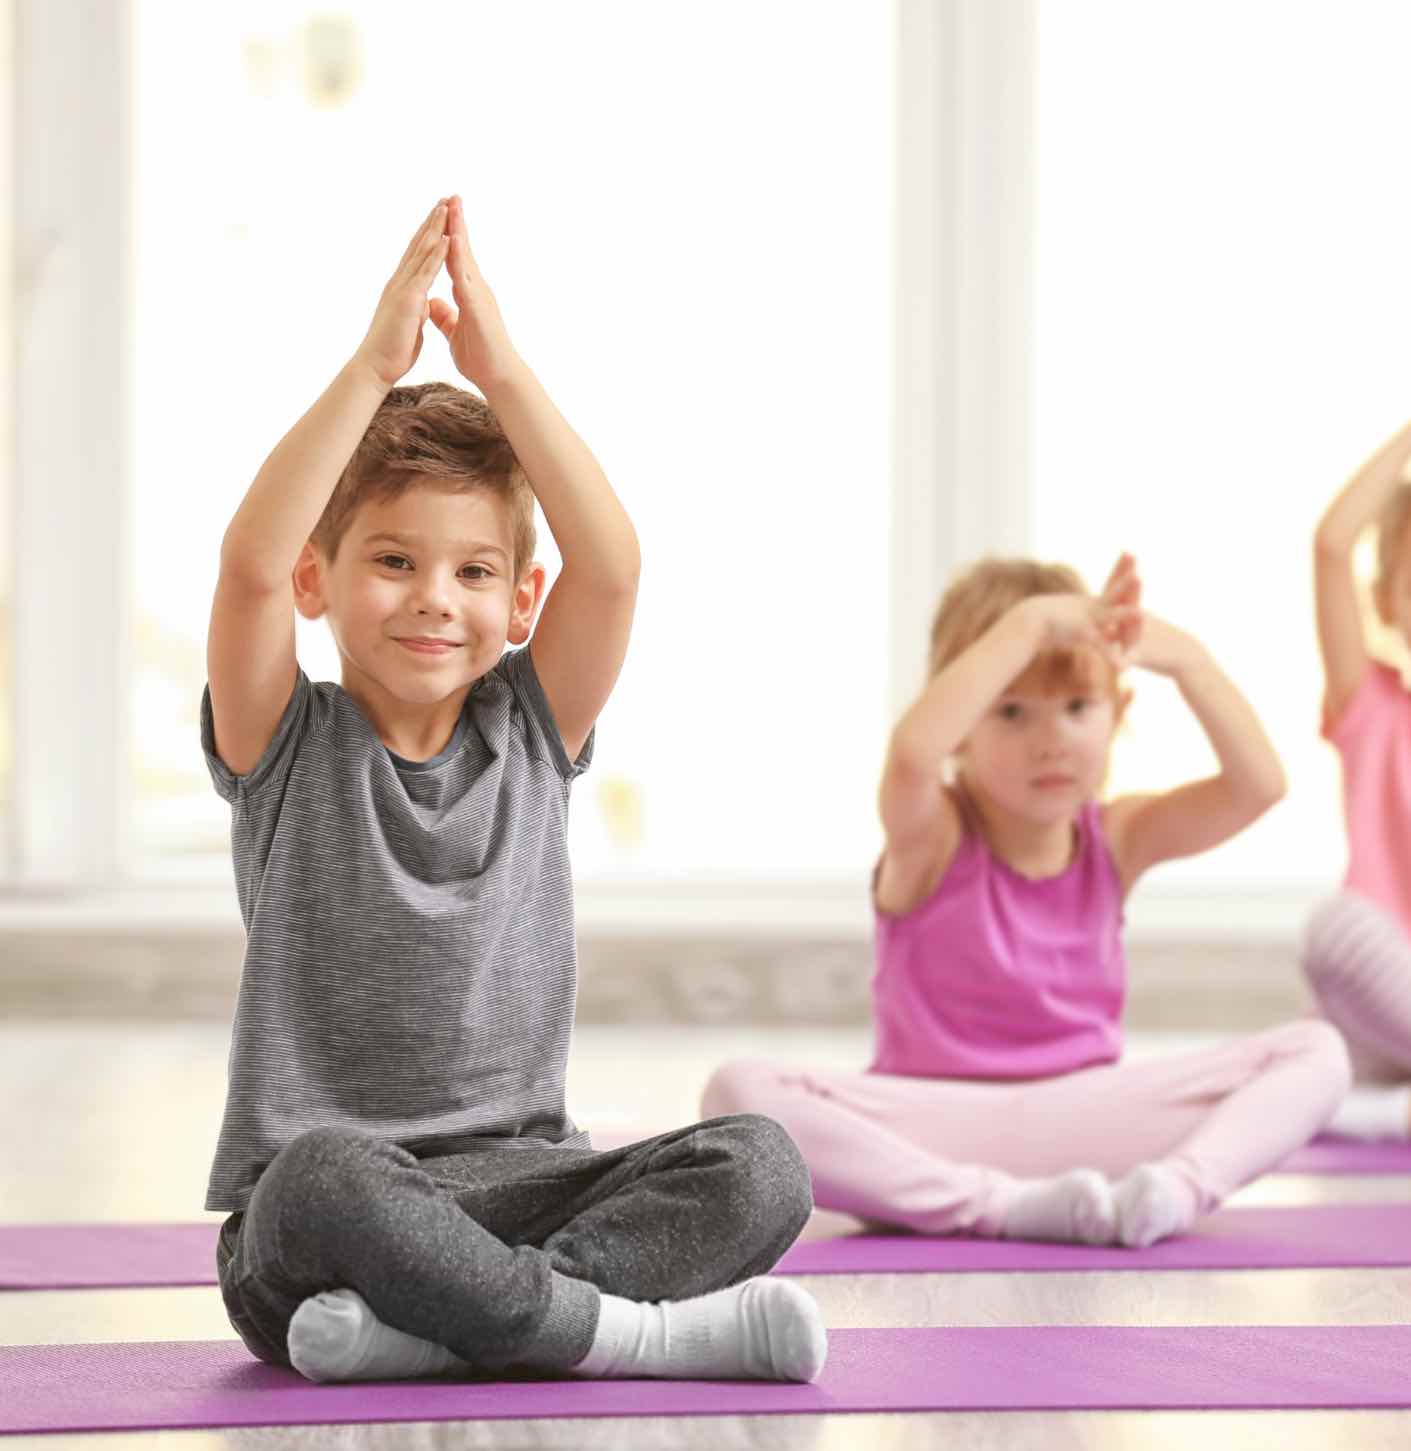 These kids enjoy practicing mindfulness through yoga - learn more tips with Romp n' Roll in Willow Grove, PA!